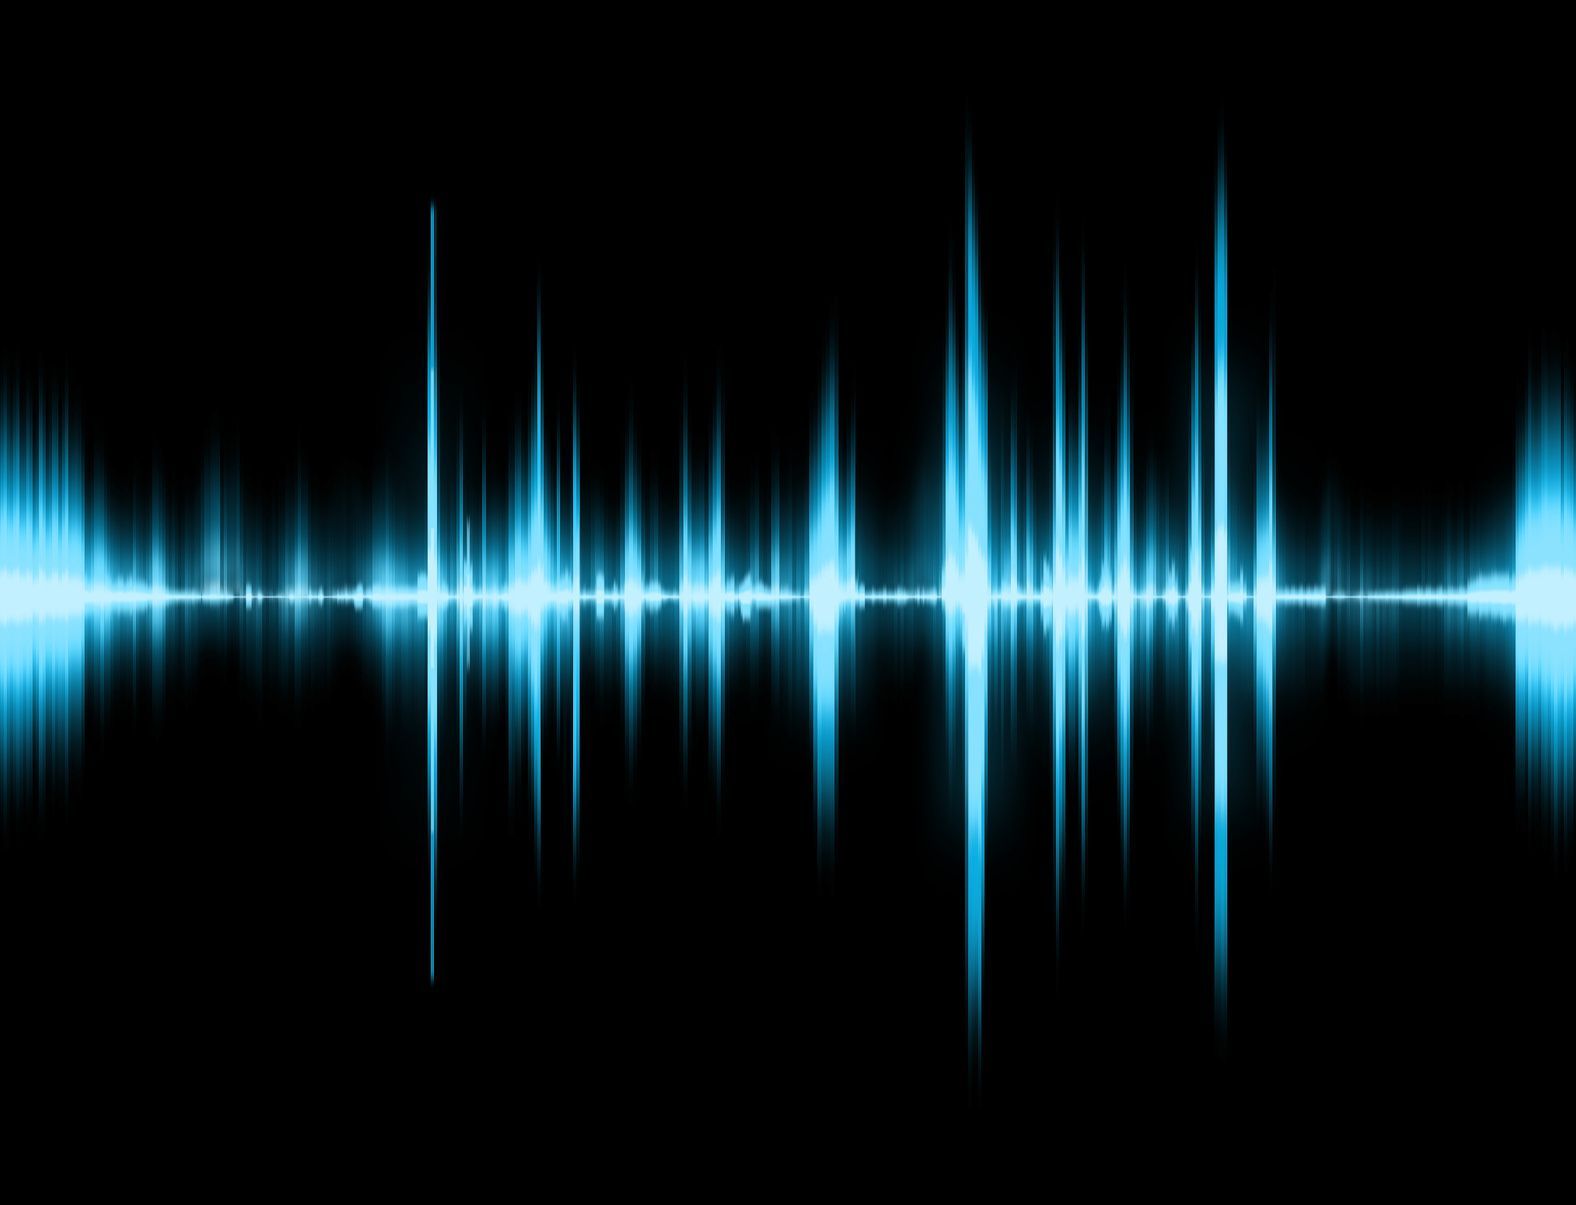 Sound waves. Sound waves, Music image, Music waves